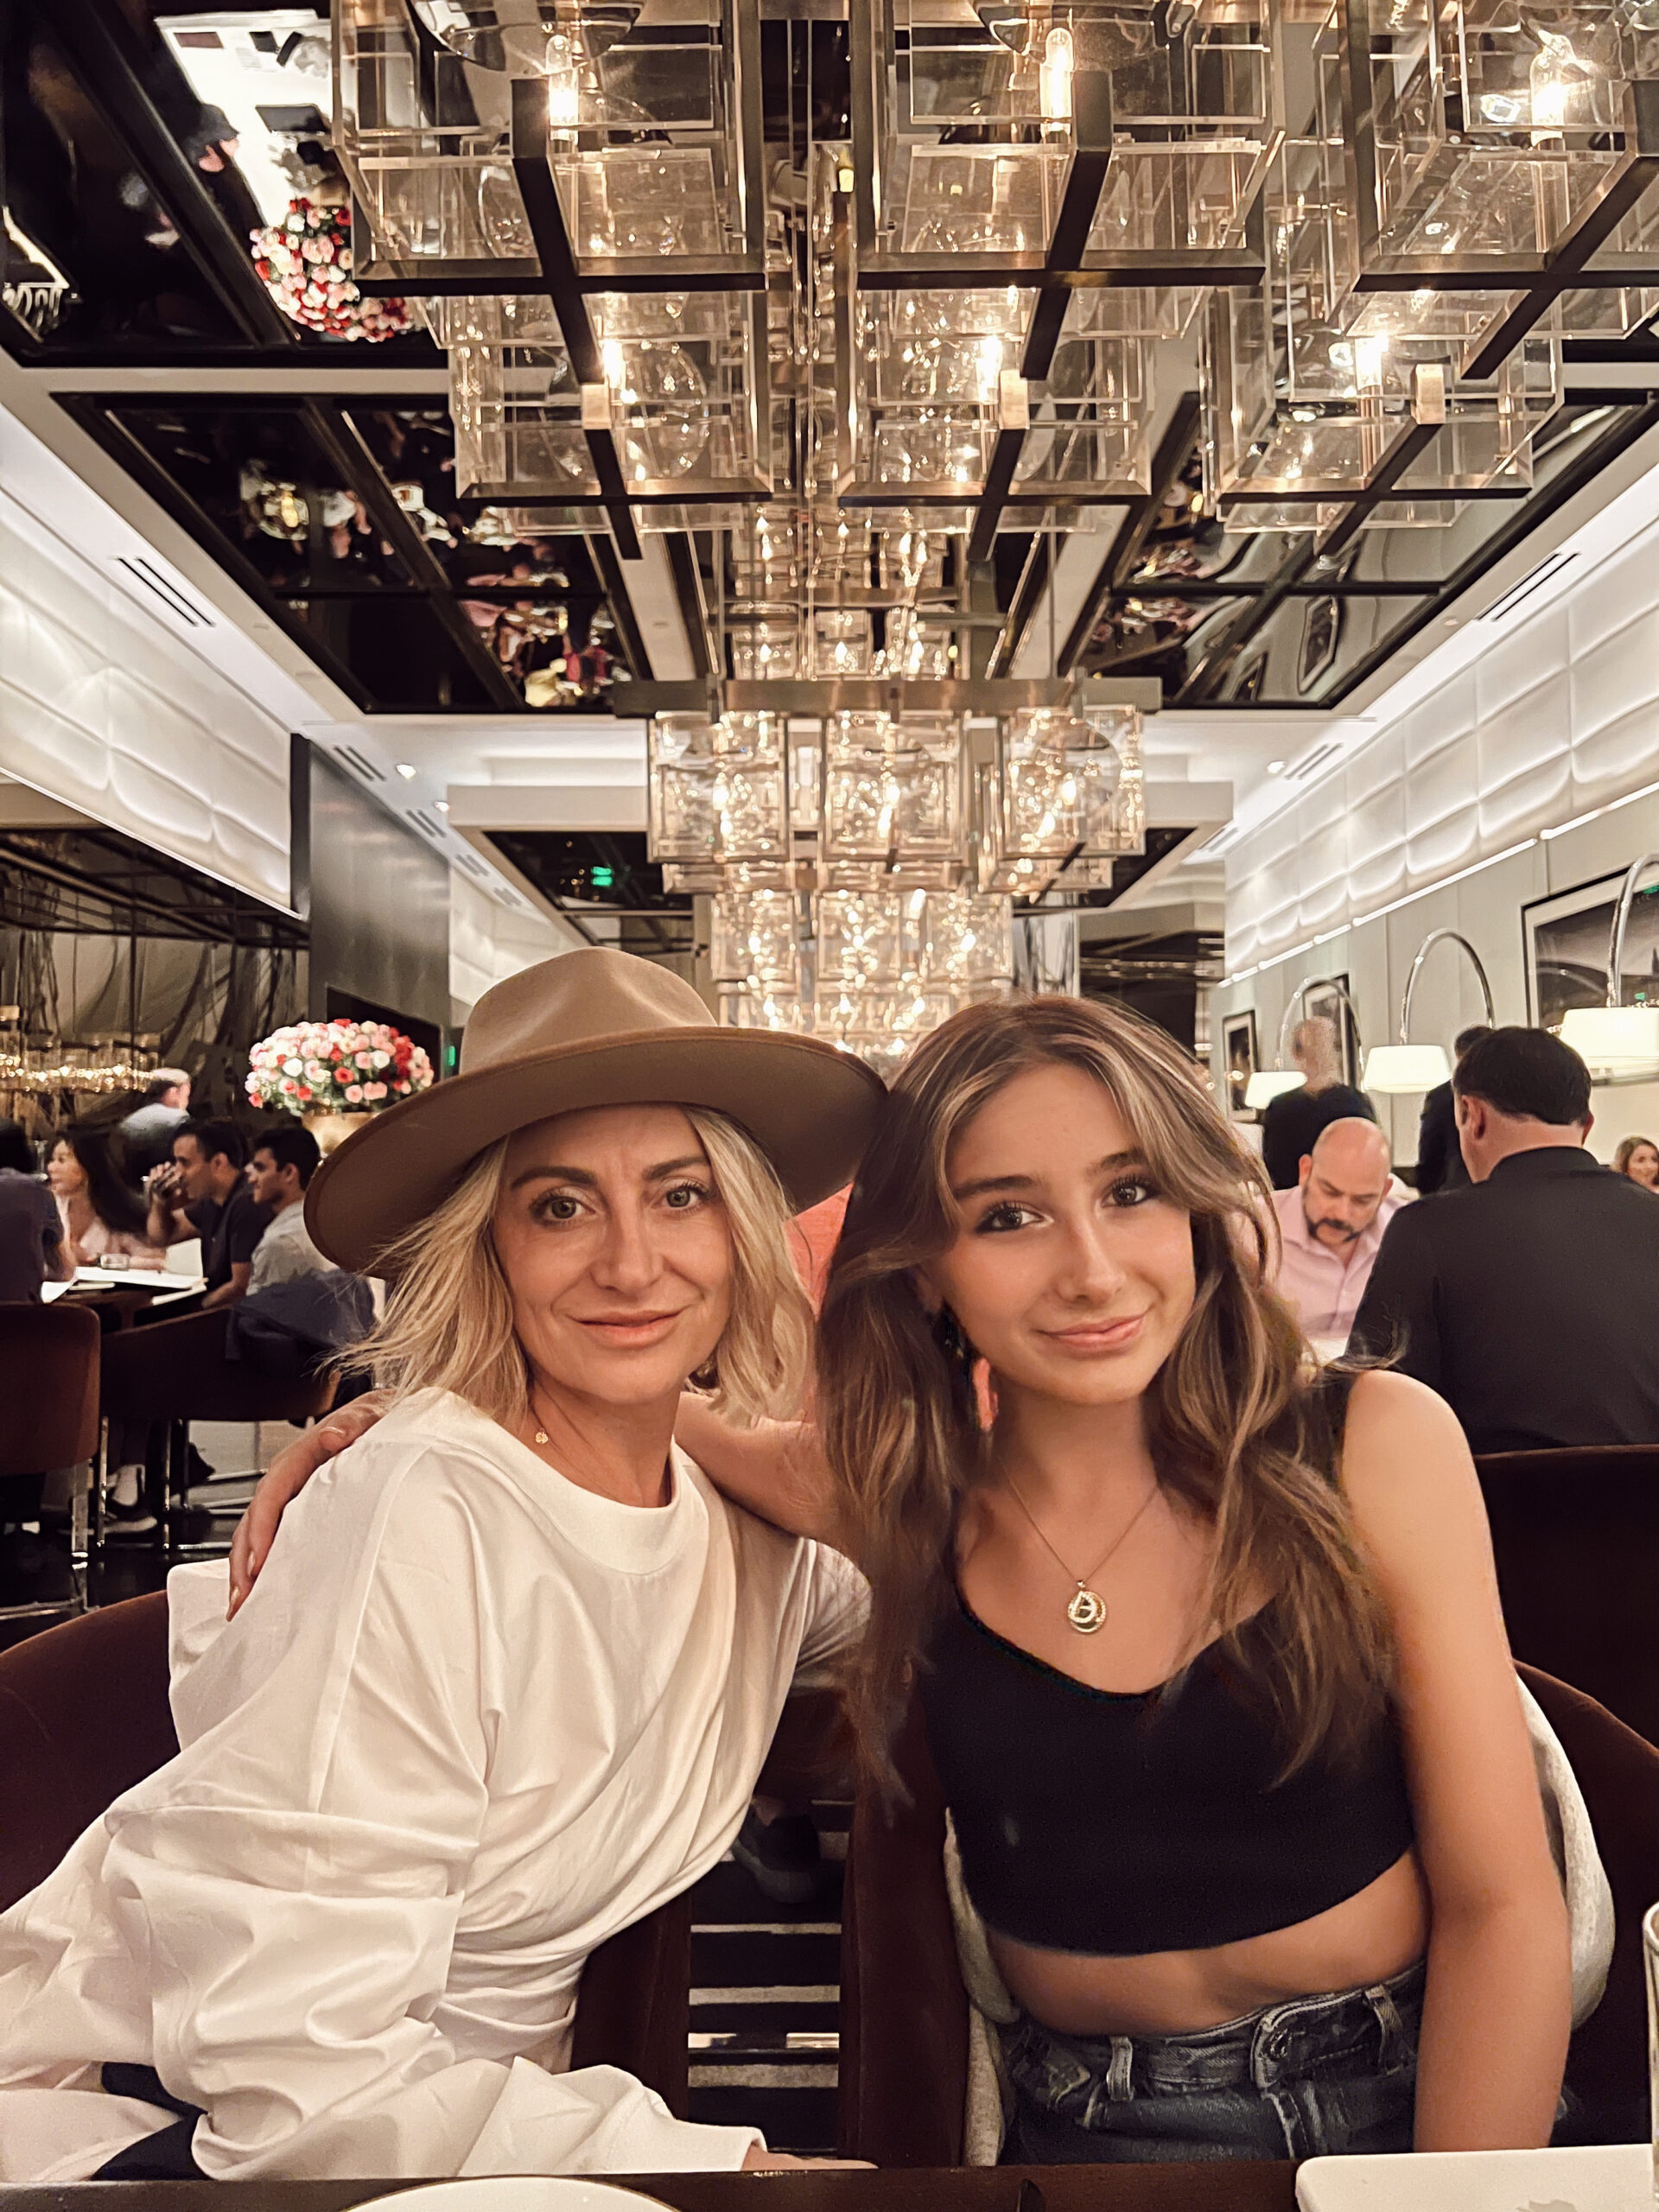 mom and daughter in a restaurant